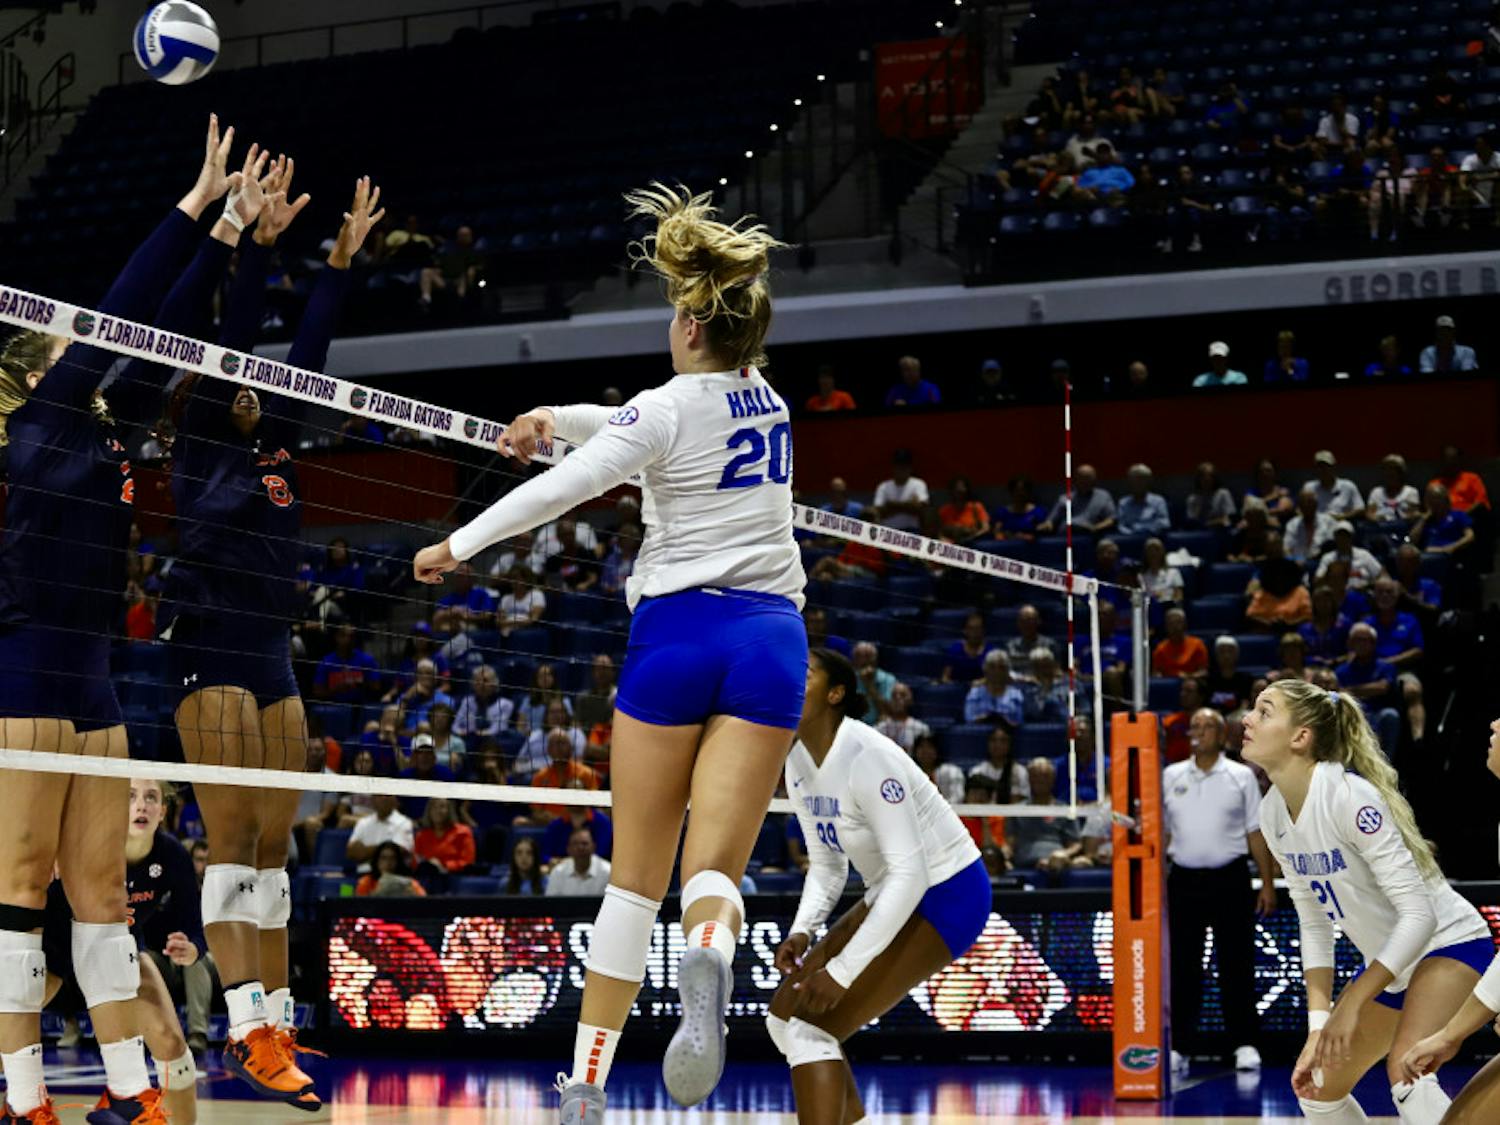 Sophomore Thayer Hall will go head-to-head against fellow outside hitter Leah Edmond, who leads Kentucky in kills (179).